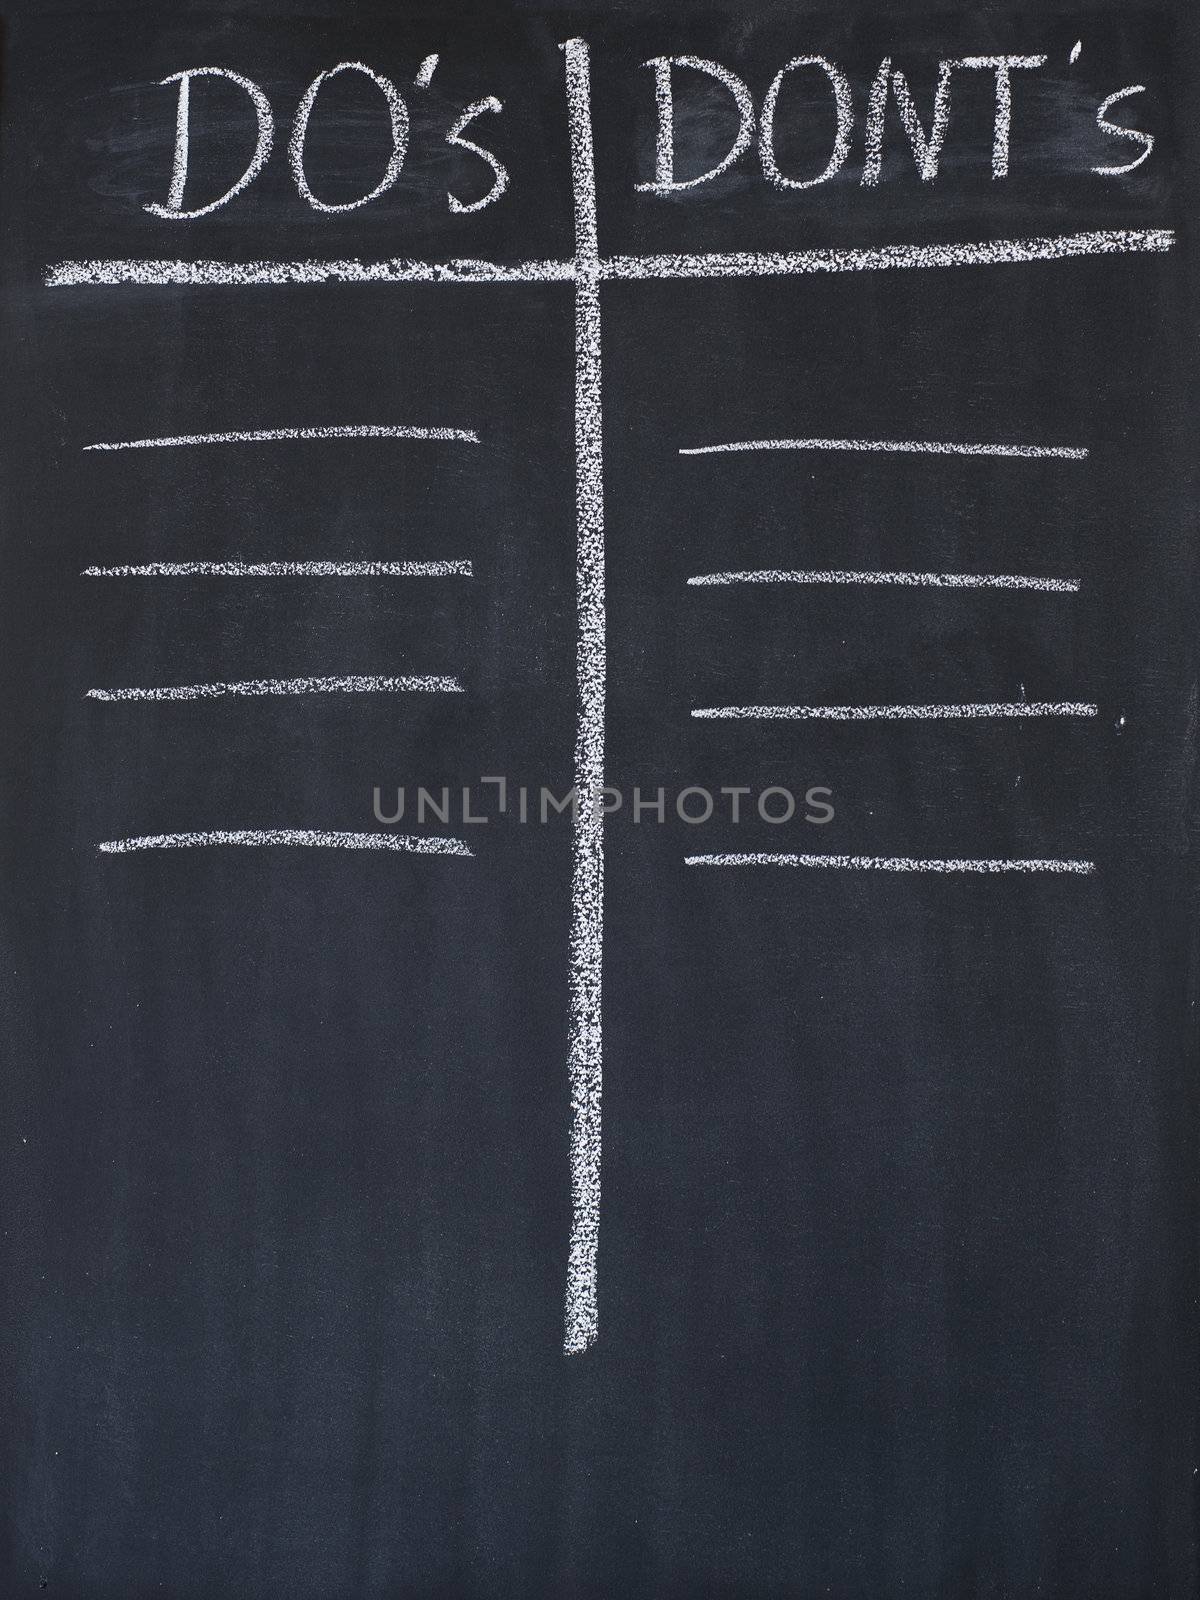 Do's and dont's list drawn on a blackboard